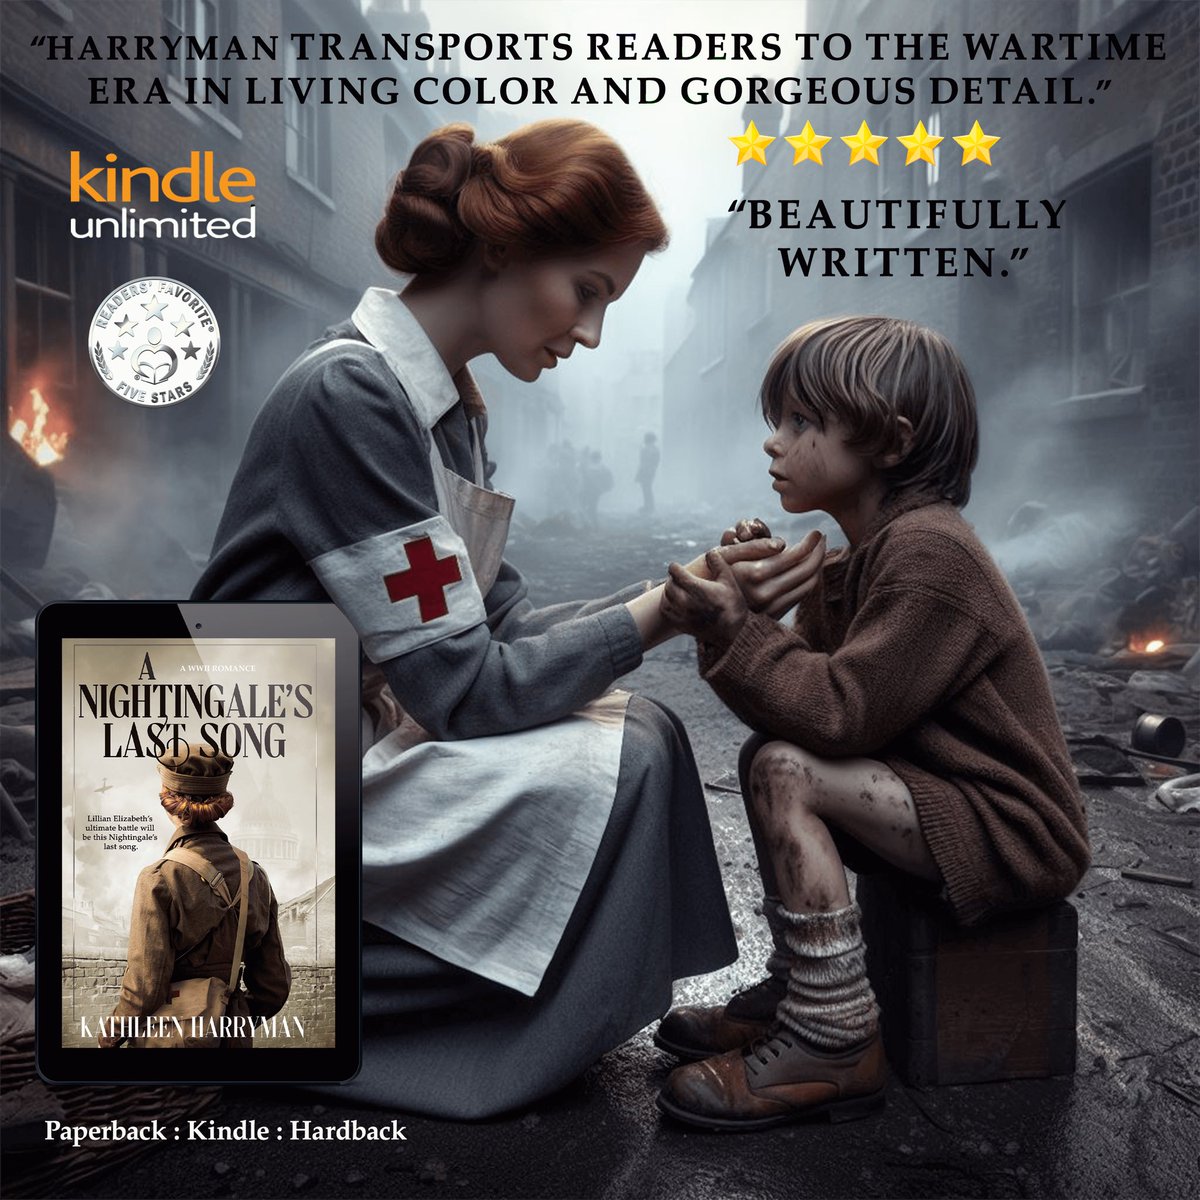 #BookReview 'Harryman’s presents an authentic, well-researched picture of the brutality and dilemmas of life during World War II.' #KU #Kindle #Paperback #Hardback mybook.to/Nightingales #HistoricalFiction #HistoricalRomance #Romance #WWII #HistFic #BooksWorthReading #IARTG